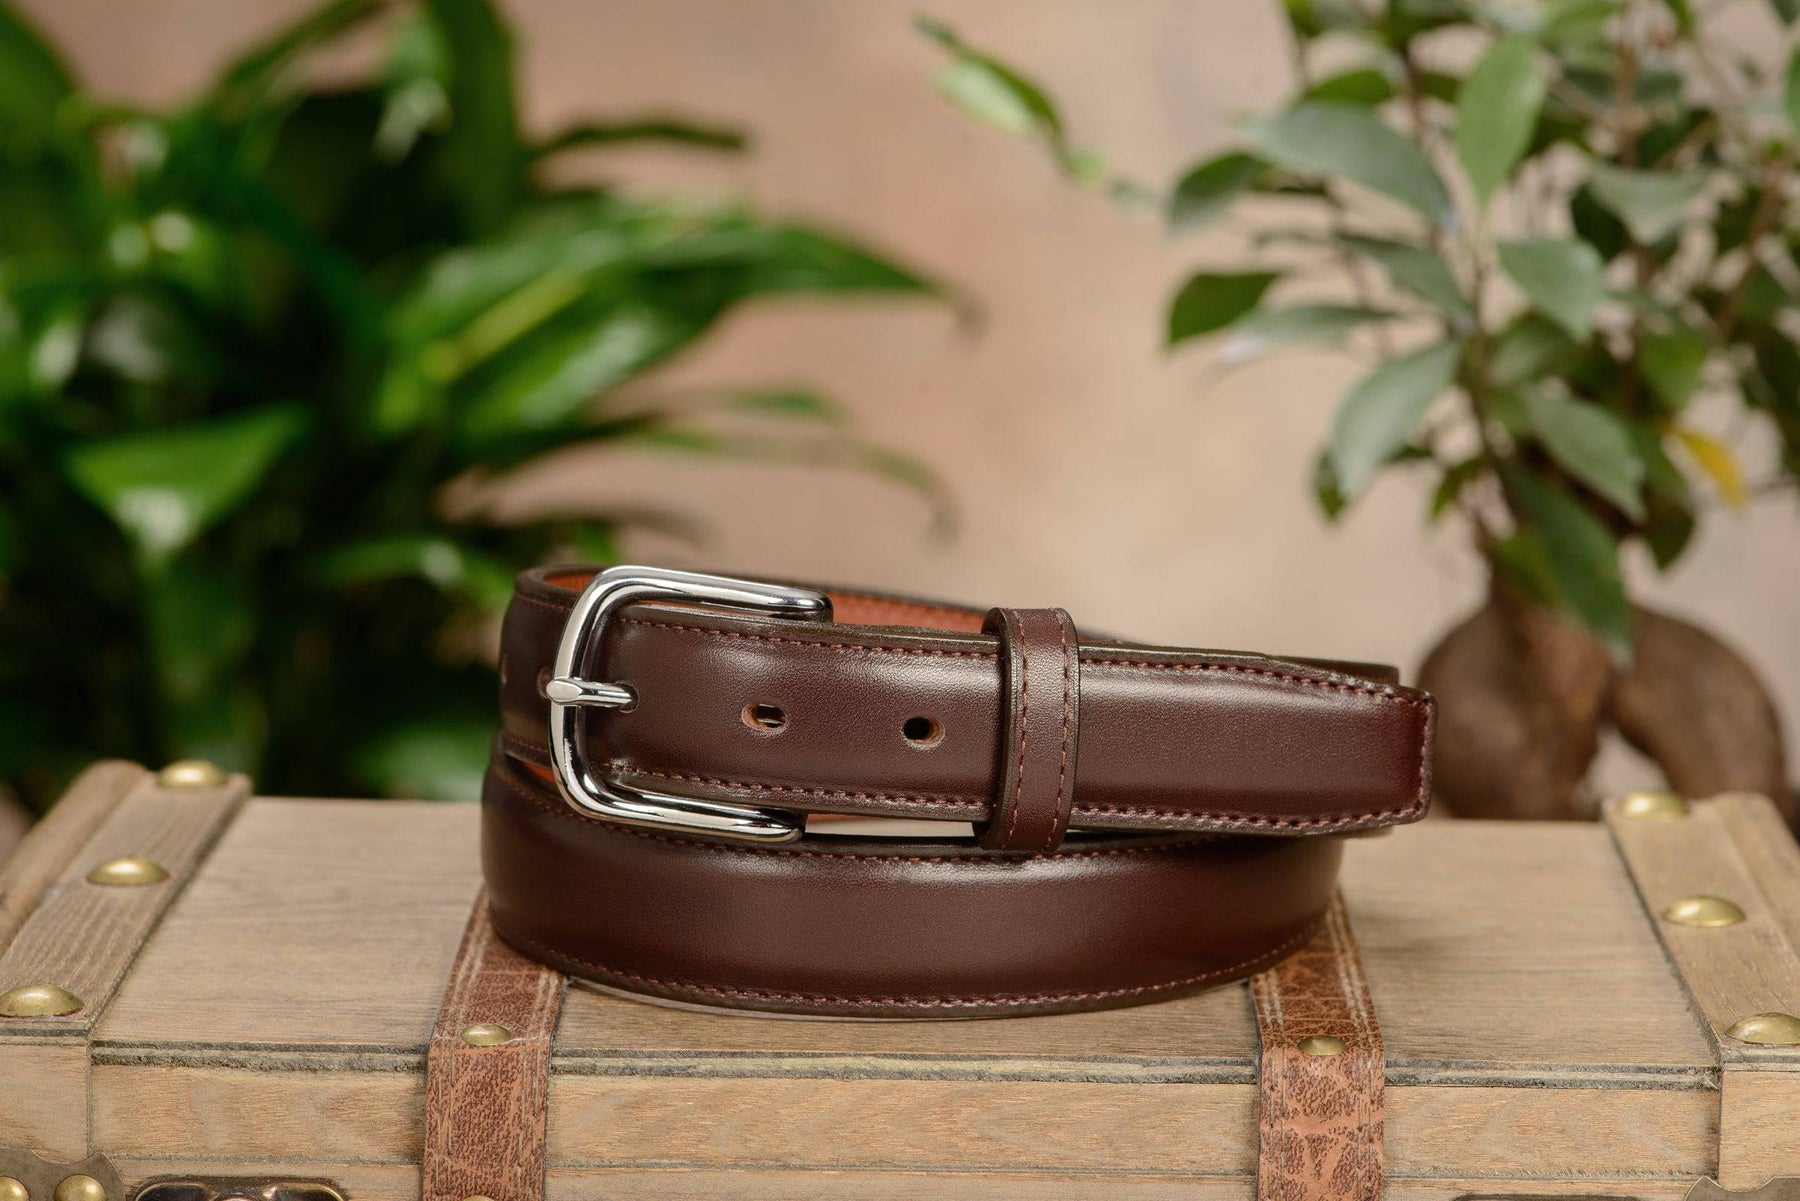 Buy LOUIS STITCH Men's Italian Leather Belt For Men's With Rotating Chrome  Buckle Black & Brown Width 1.35 (35 mm) Length 30 inch (Italy_RPCH) at  .in